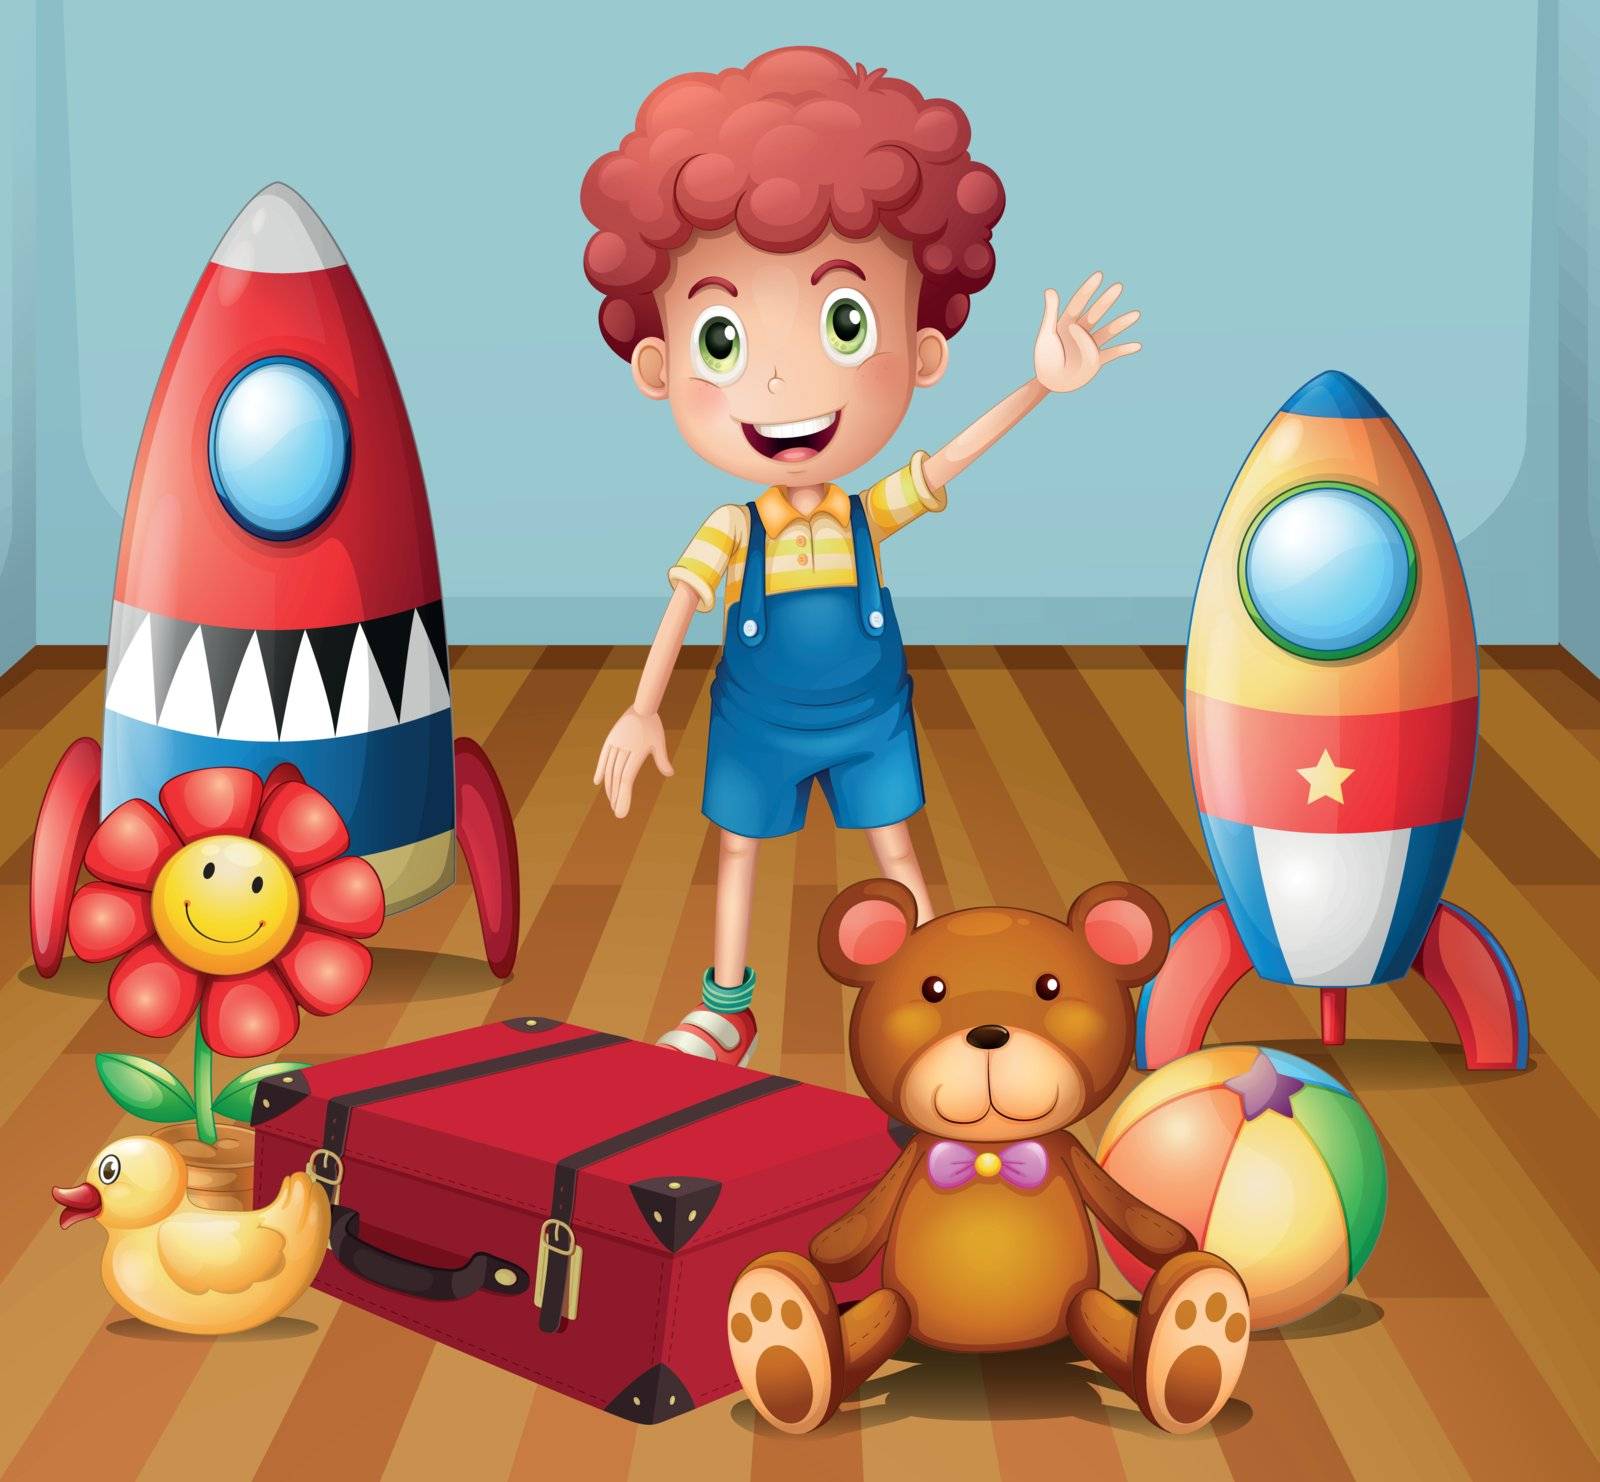 Illustration of a young boy with his toys inside the room